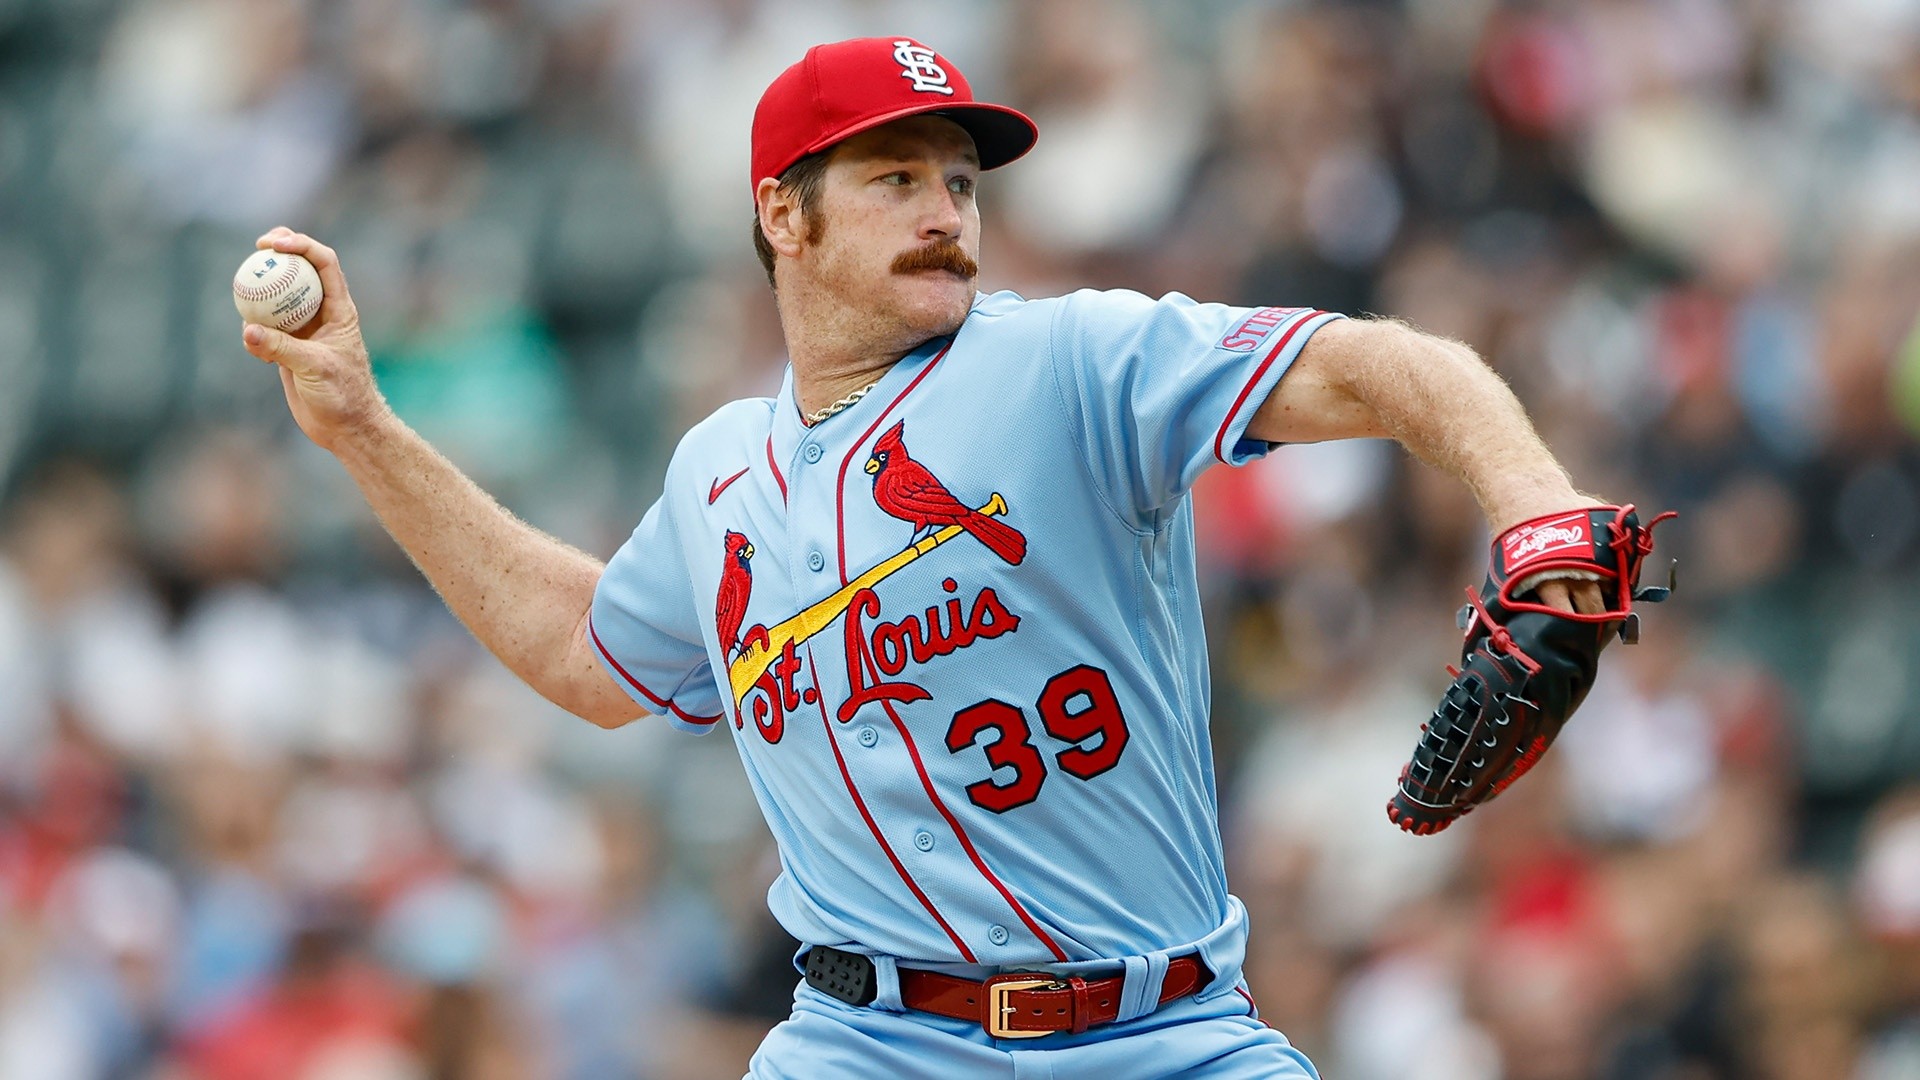 Miles Mikolas outpitched as the Nationals cool off the Cardinals, 3-0